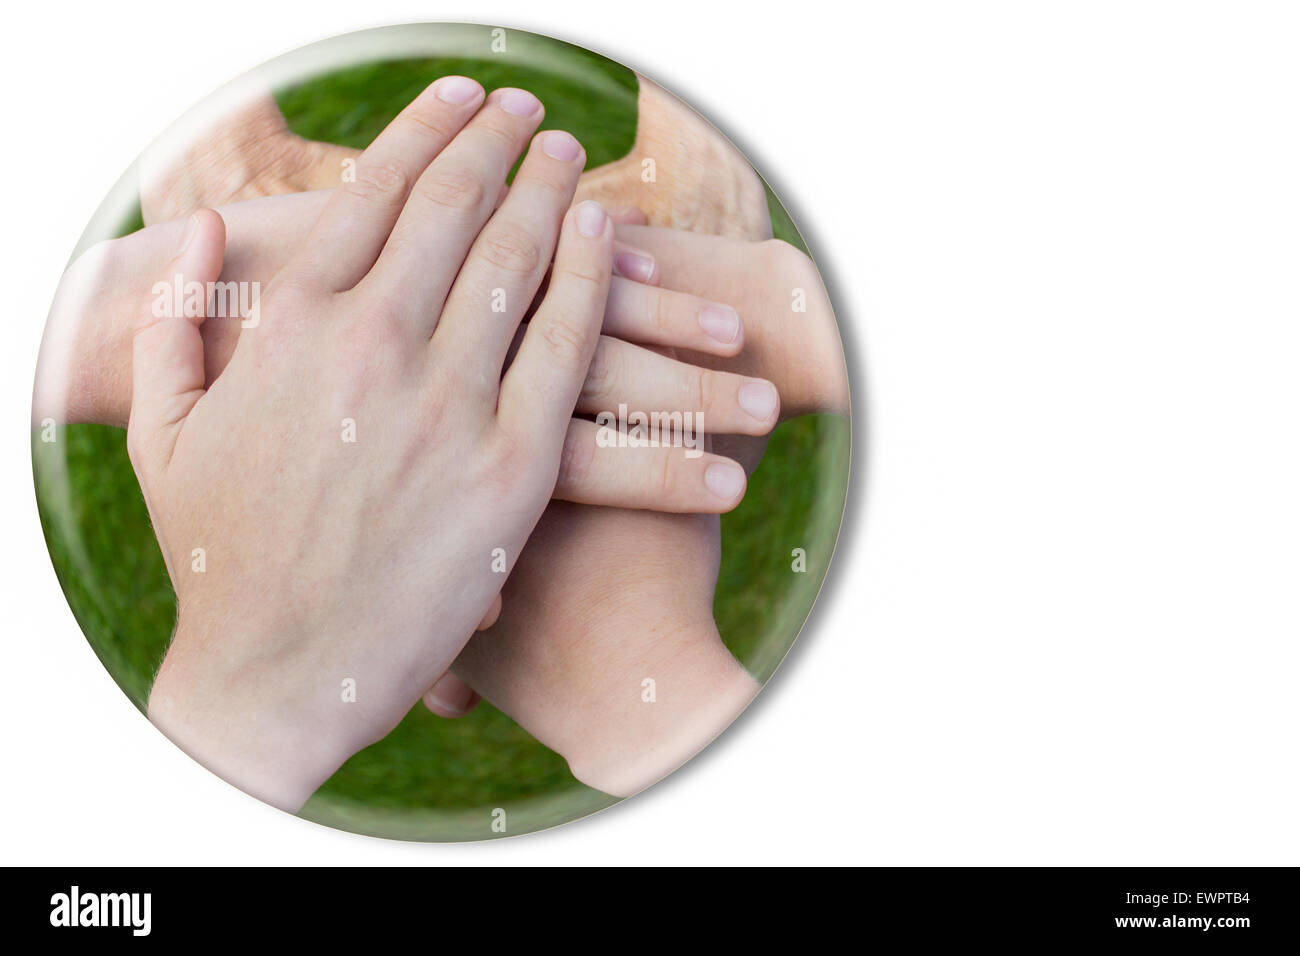 Hands uniting joining together in glass sphere isolated on white background Stock Photo